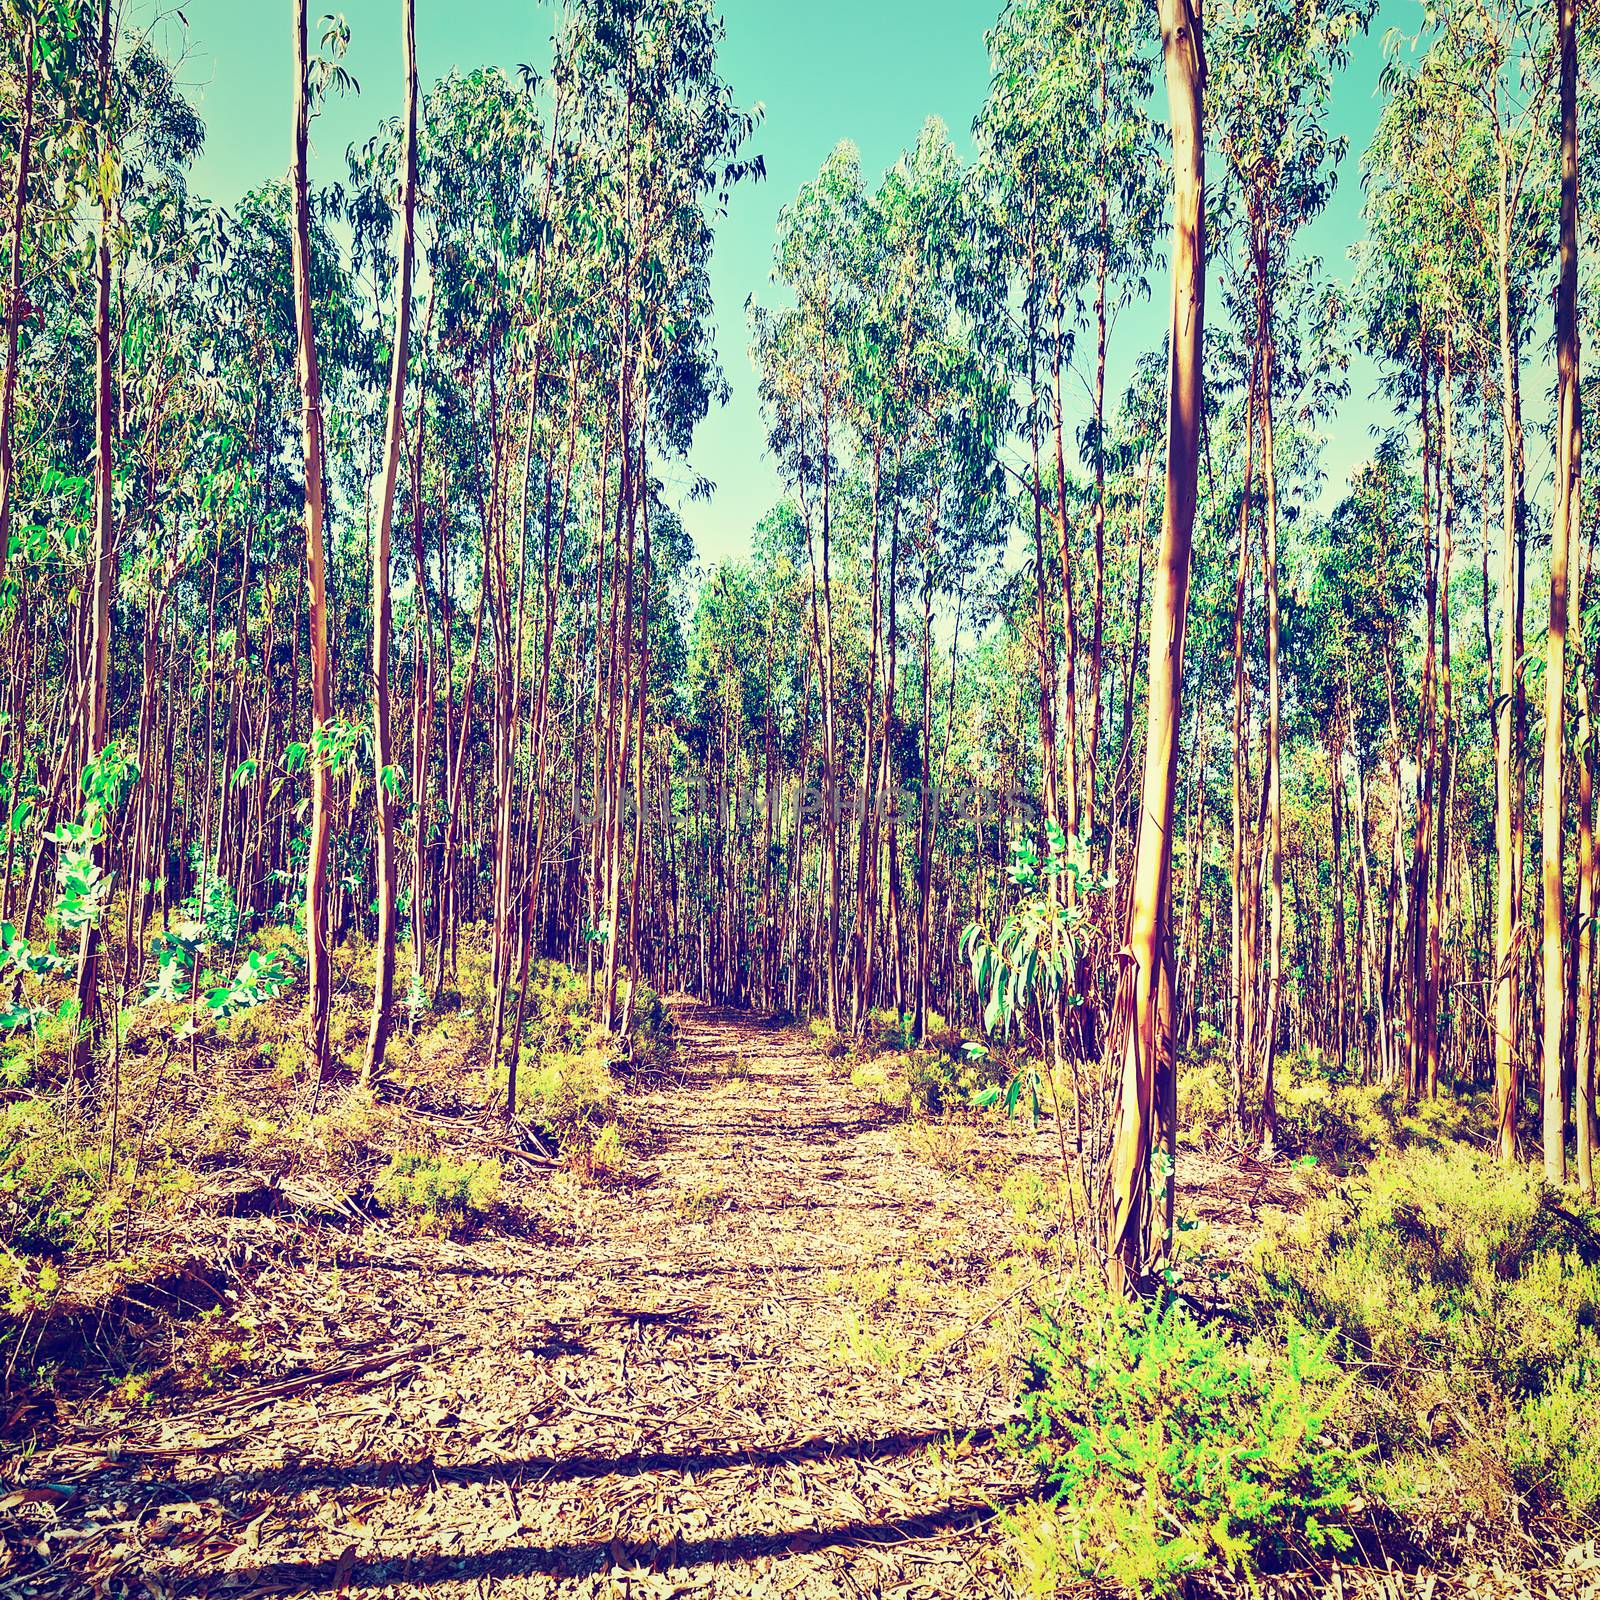 Forest Dirt Road in Portugal, Instagram Effect